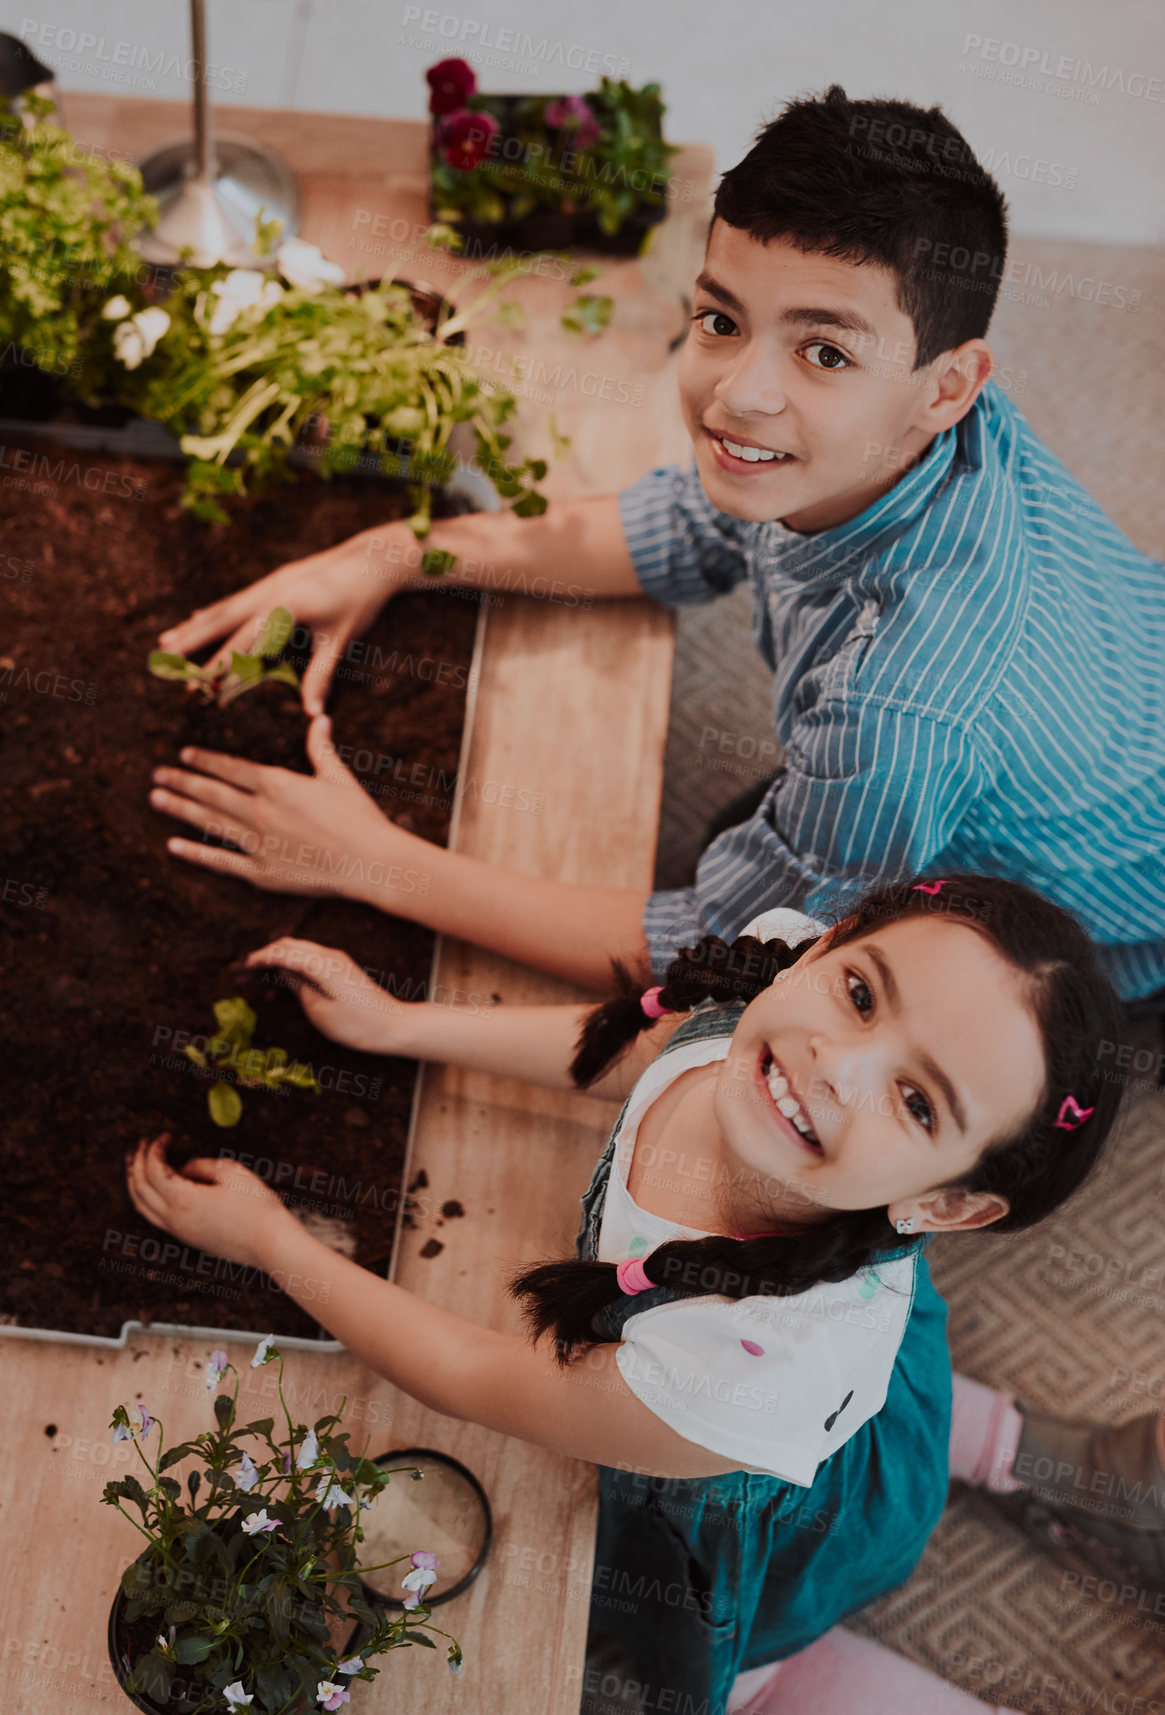 Buy stock photo High angle portrait of two adorable siblings smiling while experimenting with plants at home